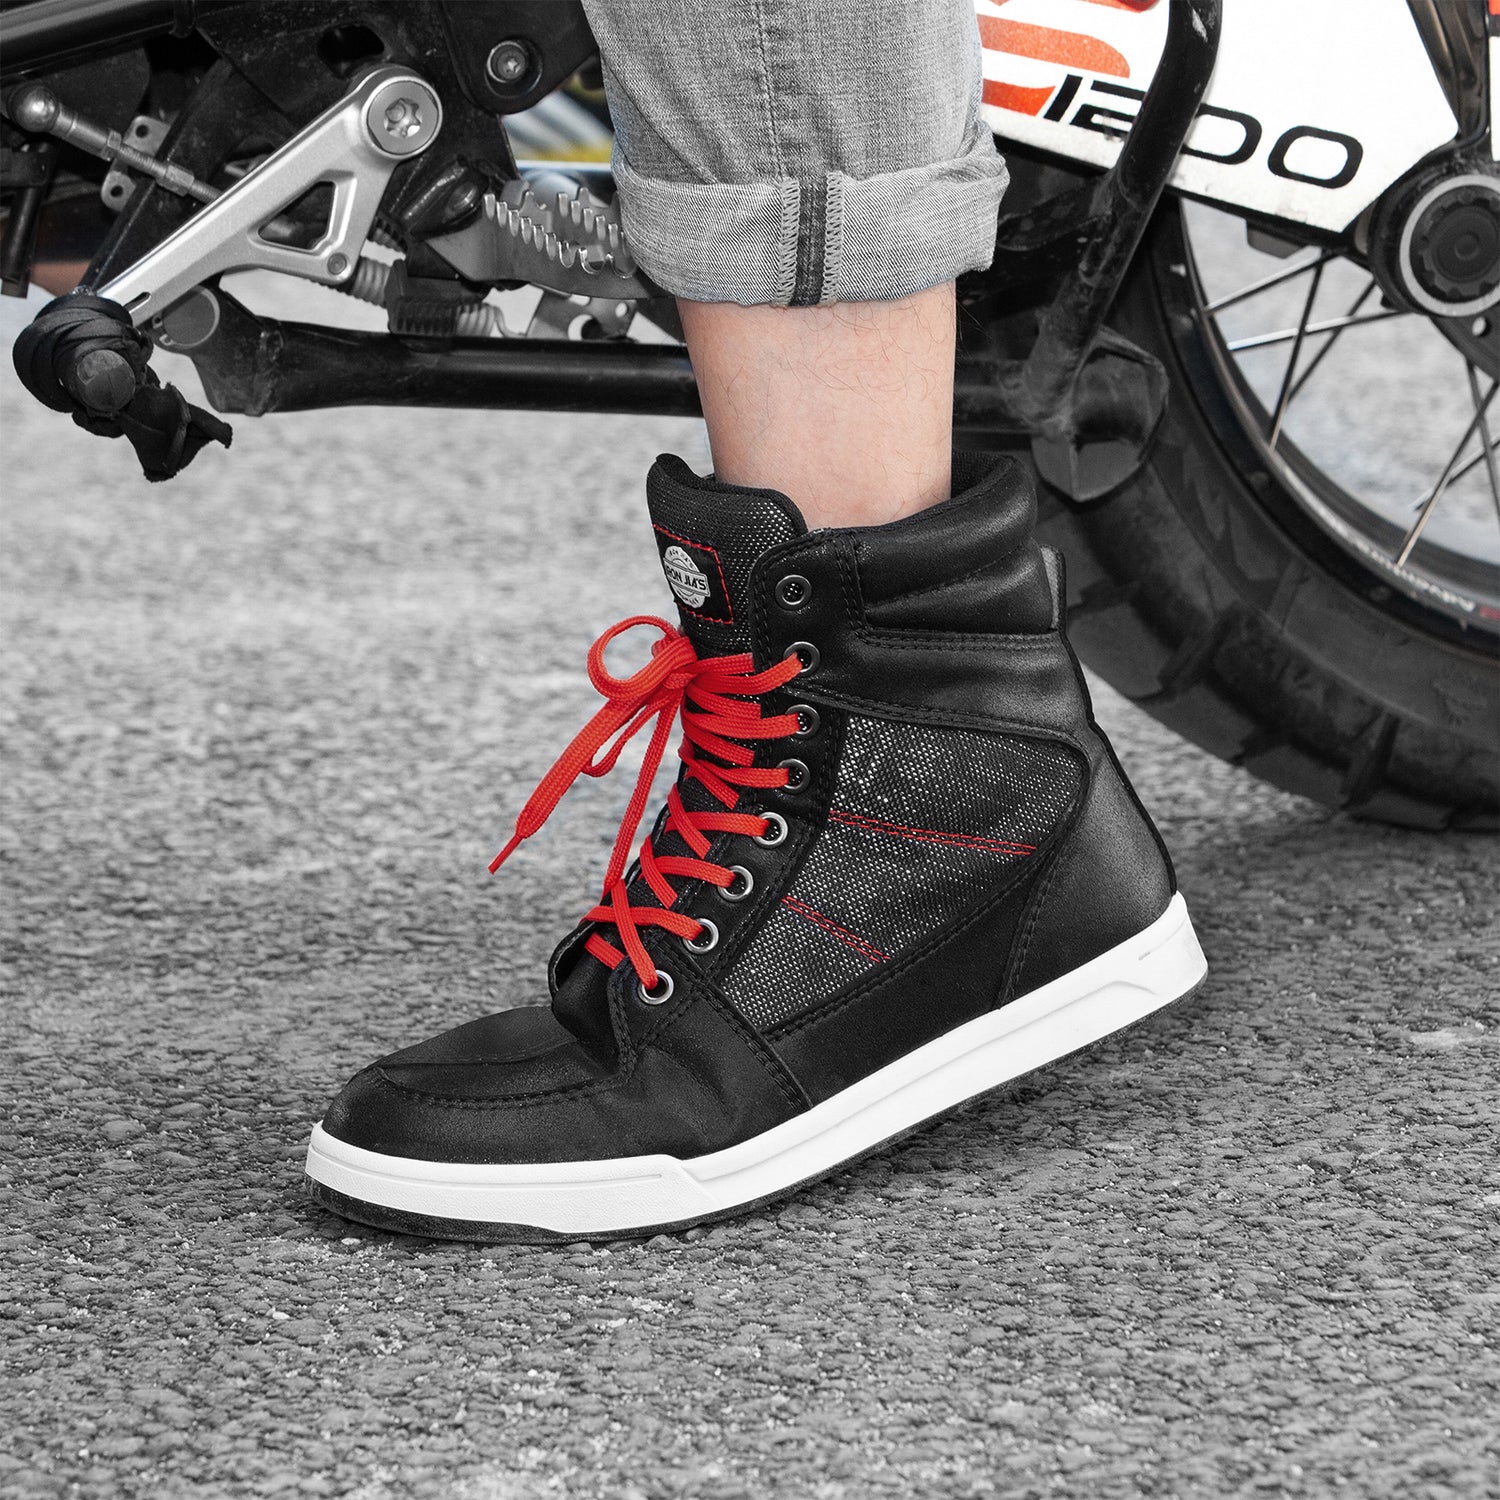 IRON JIA'S Motorcycle Shoes For Men Anti-slip Reflective Motorbike Boots  Street Moto Riding Shoes Wear Resistant Motocross Boots